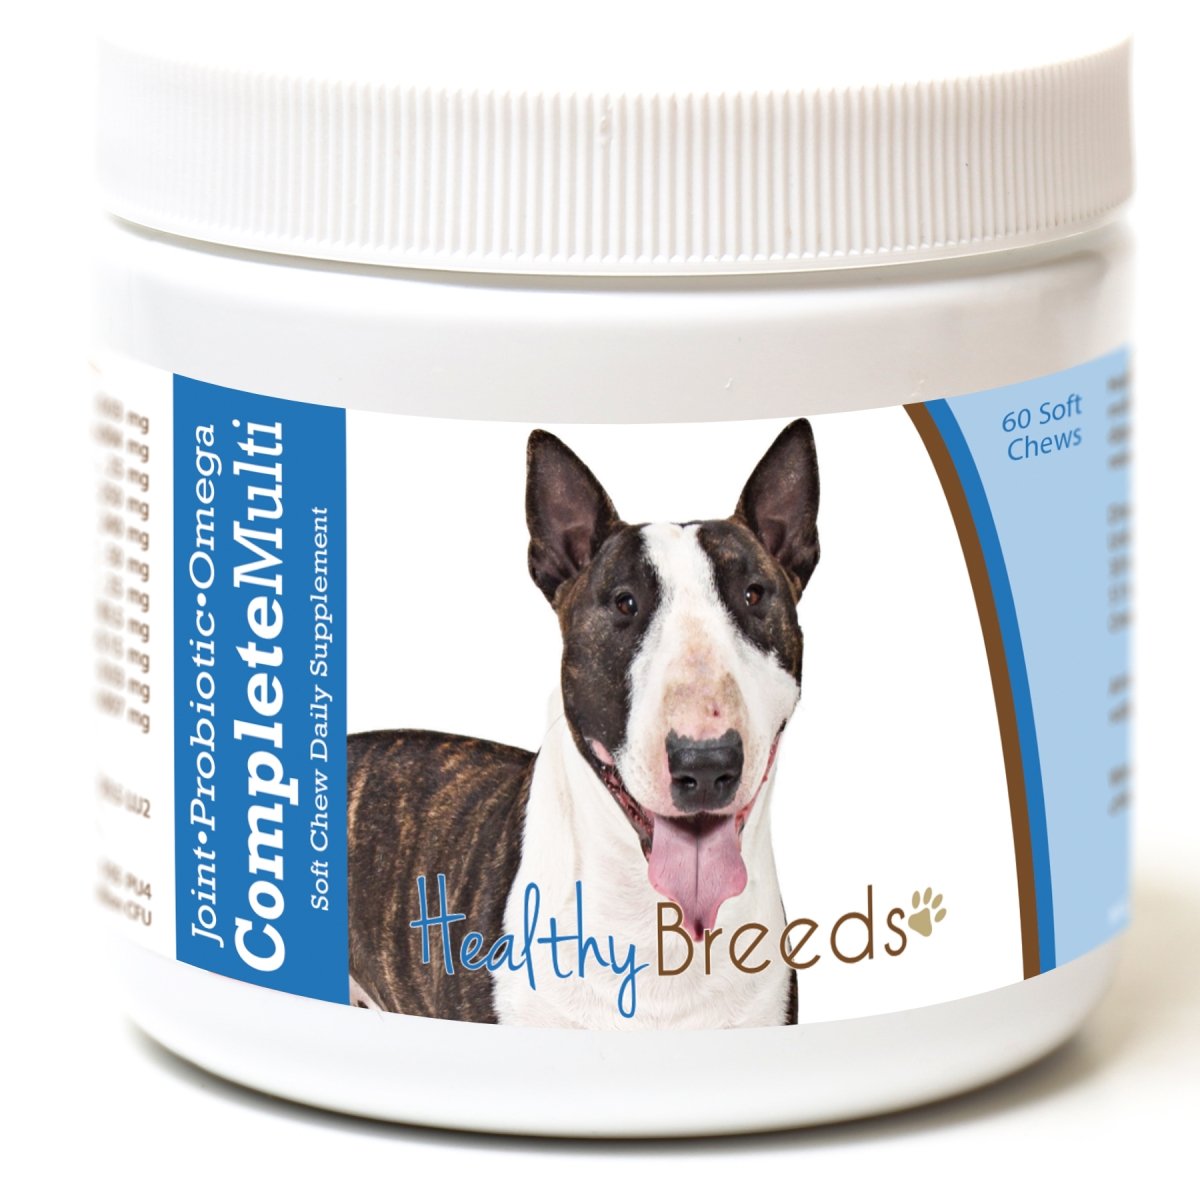 Picture of Healthy Breeds 192959008487 Miniature Bull Terrier All in One Multivitamin Soft Chew - 60 Count